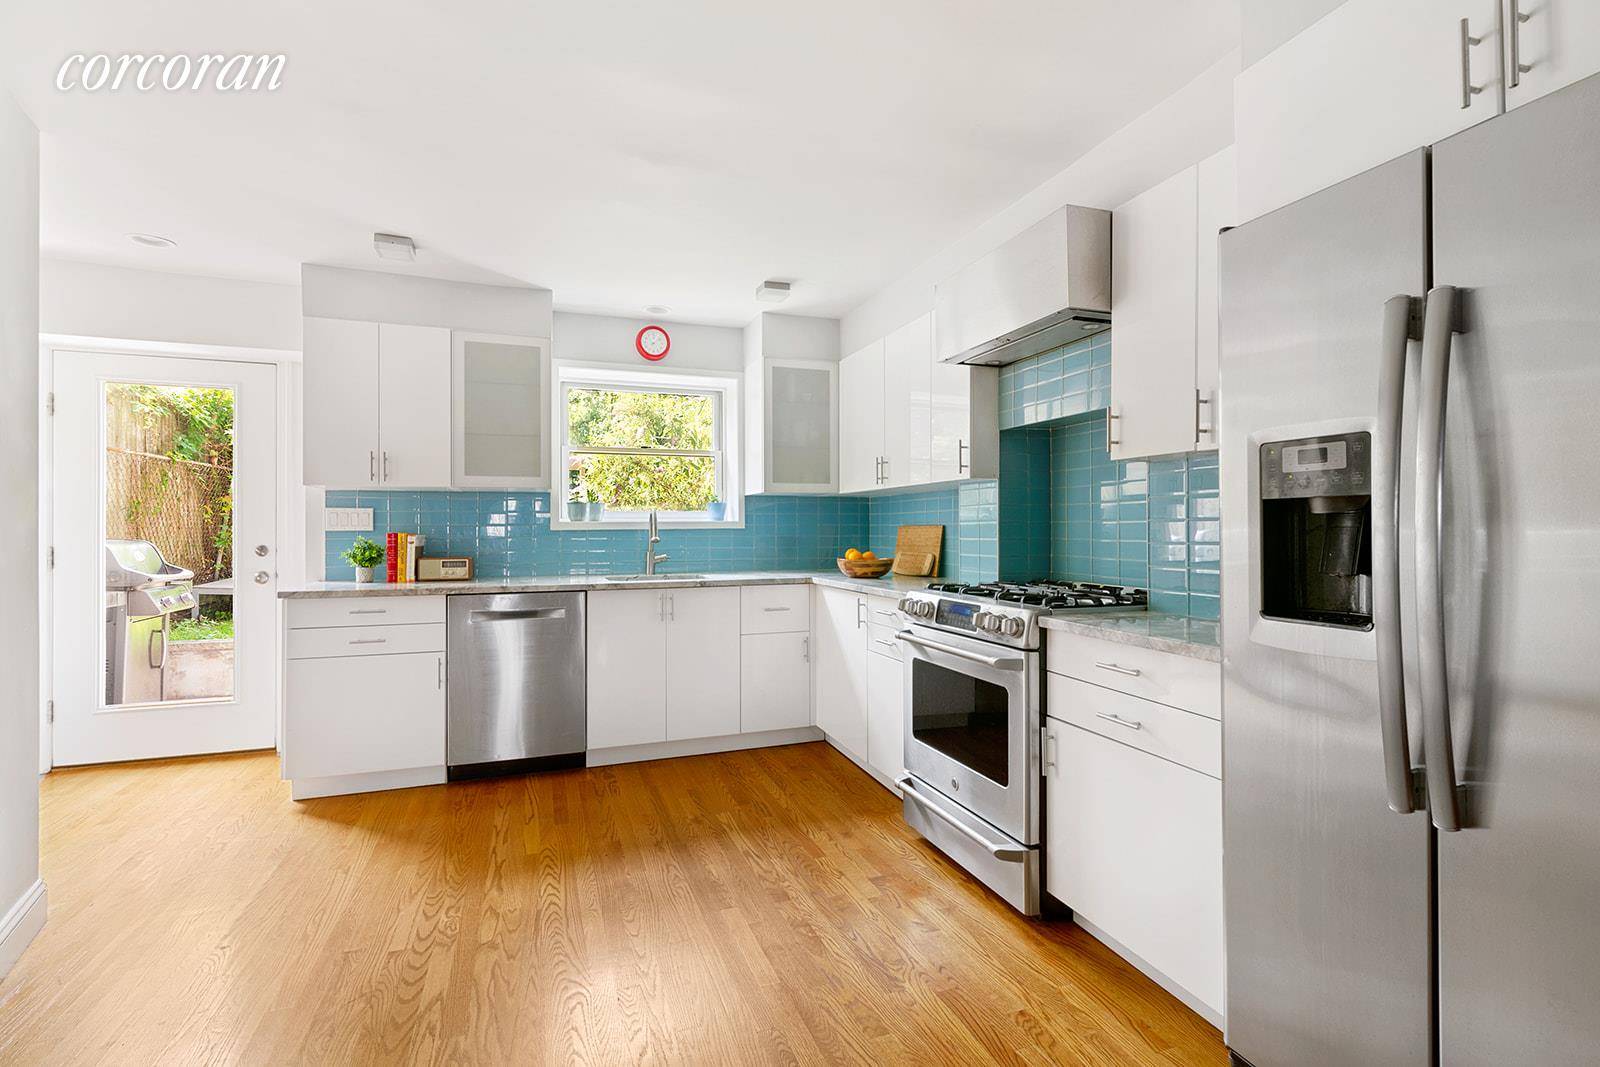 Finely renovated for modern tastes yet classically elegant with original features, this stunning 2 unit townhouse is currently configured as a single family home.